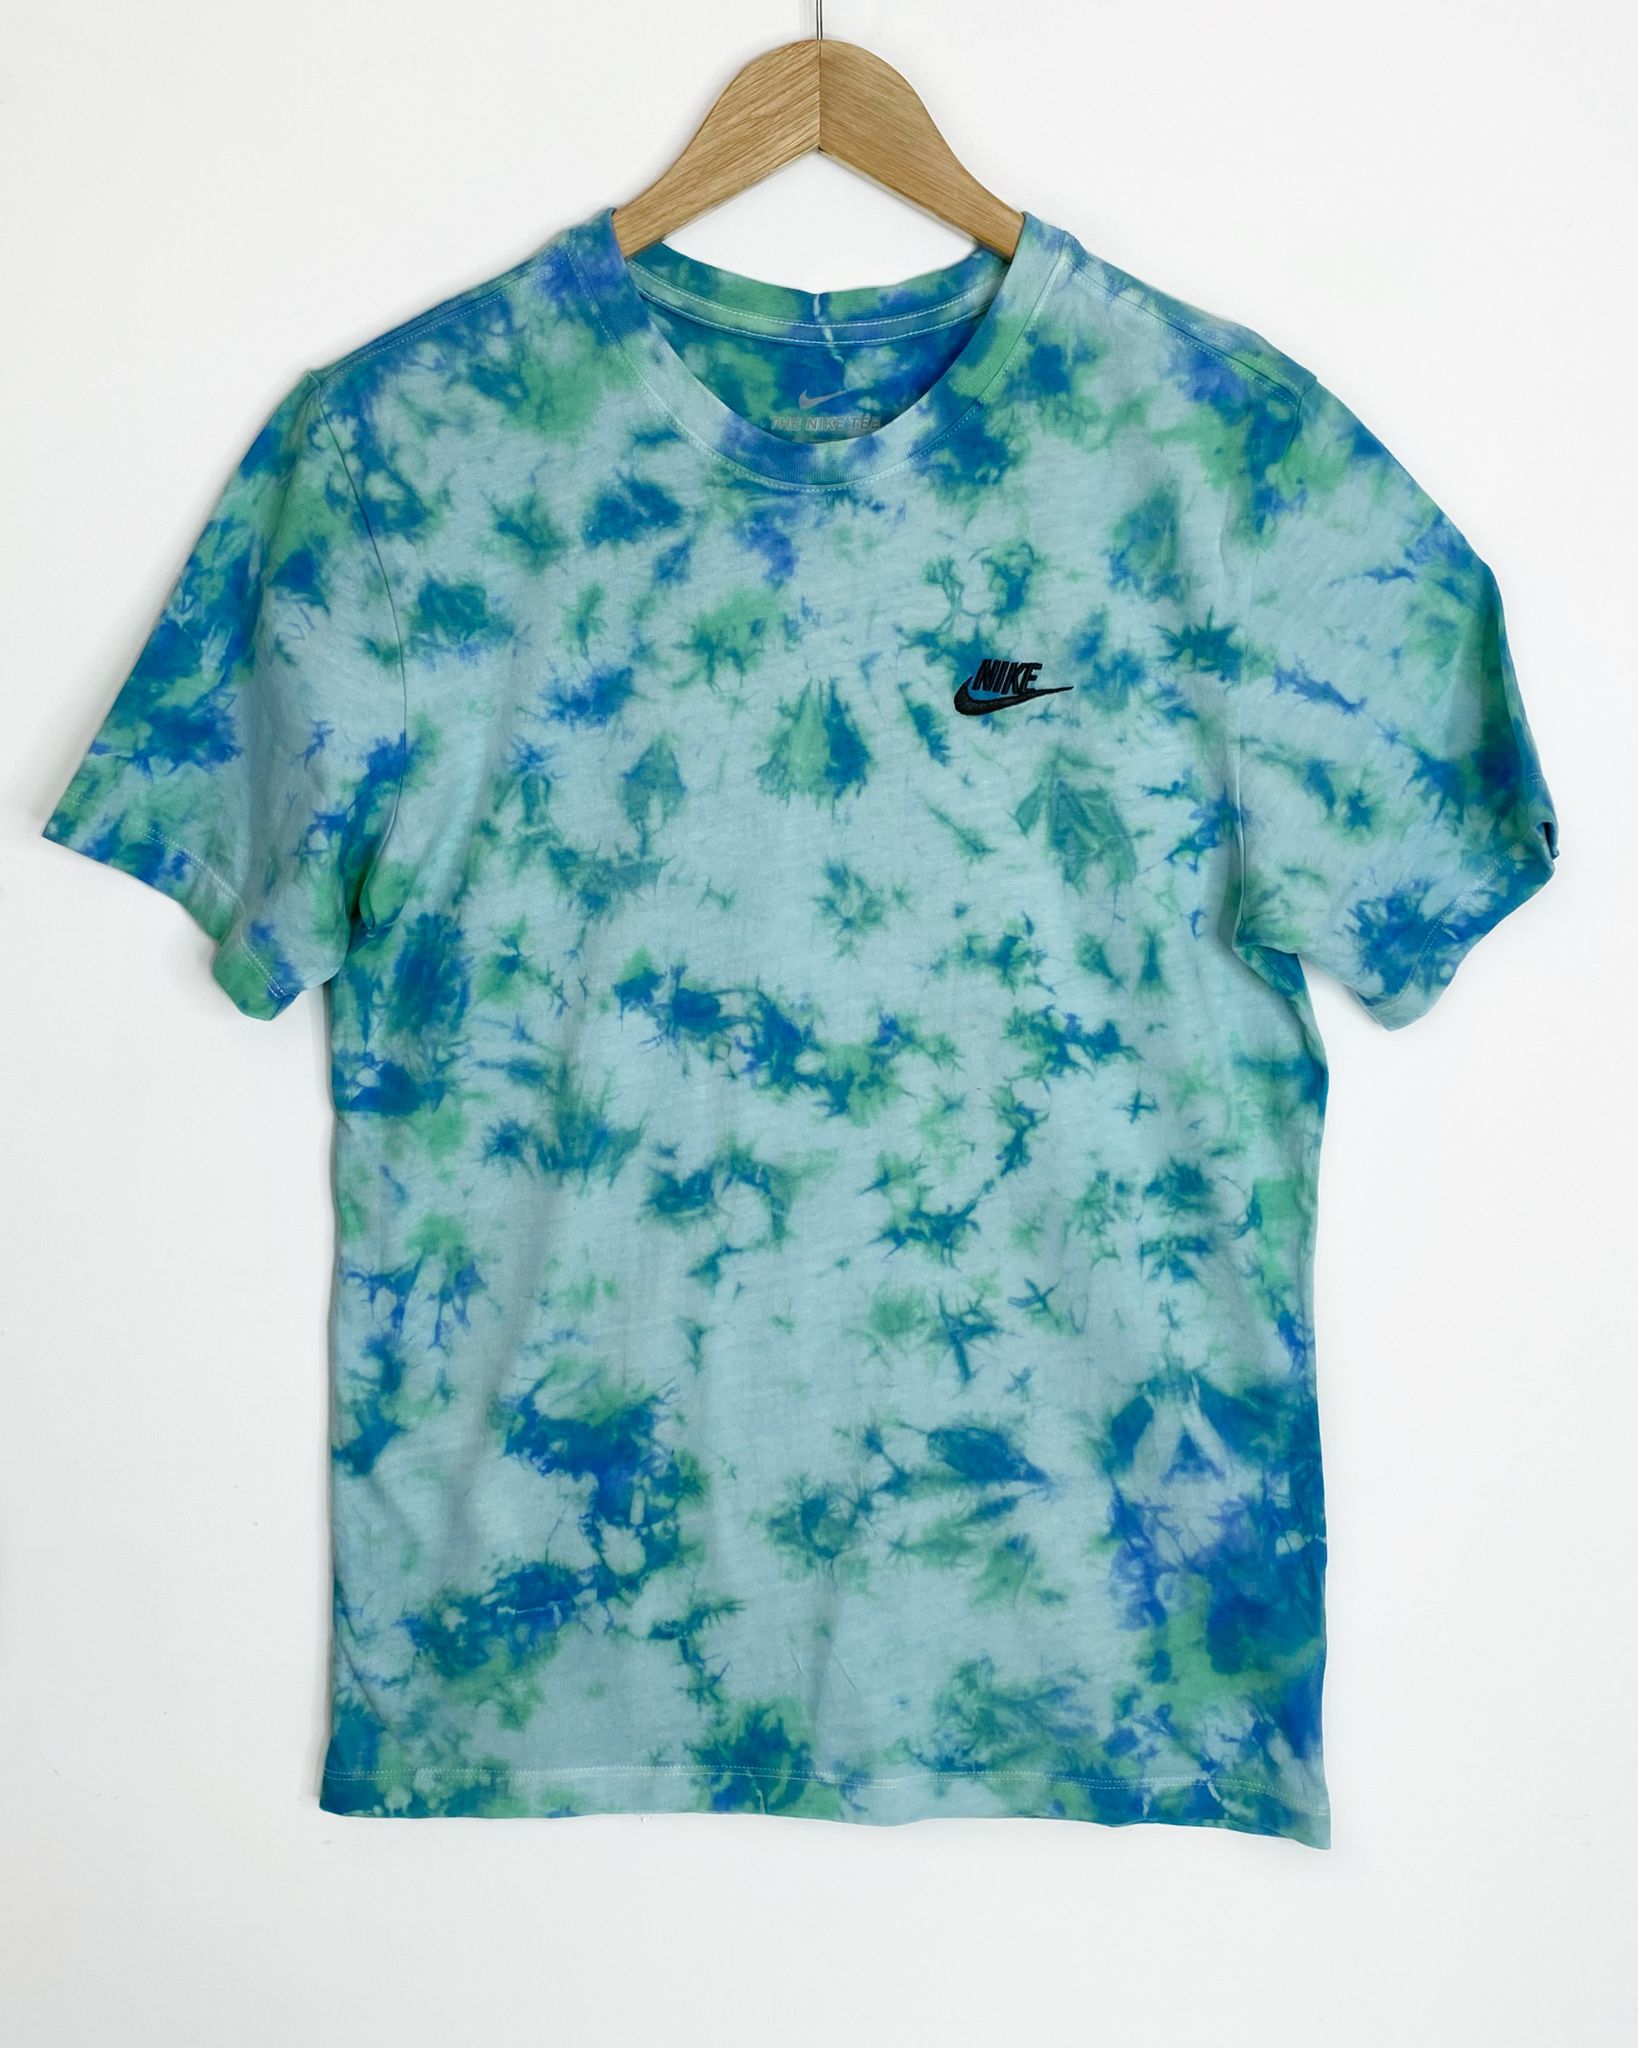 Colorful and unique Tulip tie dye pattern on 100% authentic Nike tee.